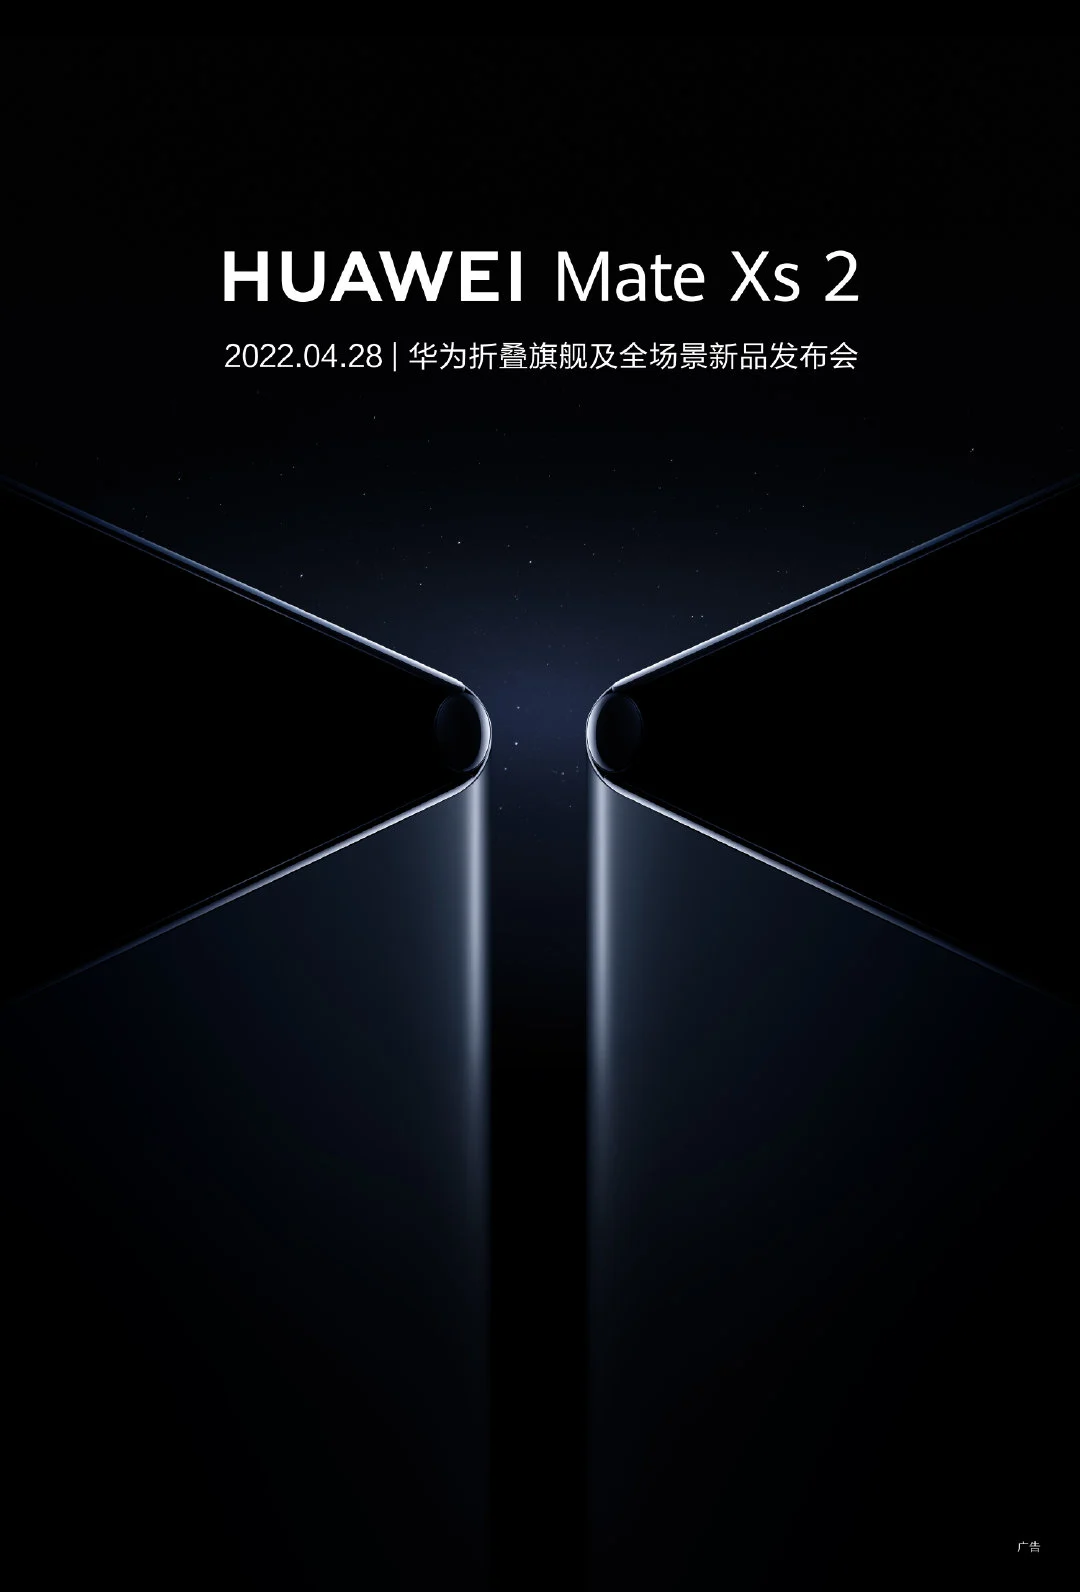 Folding Huawei Mate Xs 2: specifications and release dates – фото 1